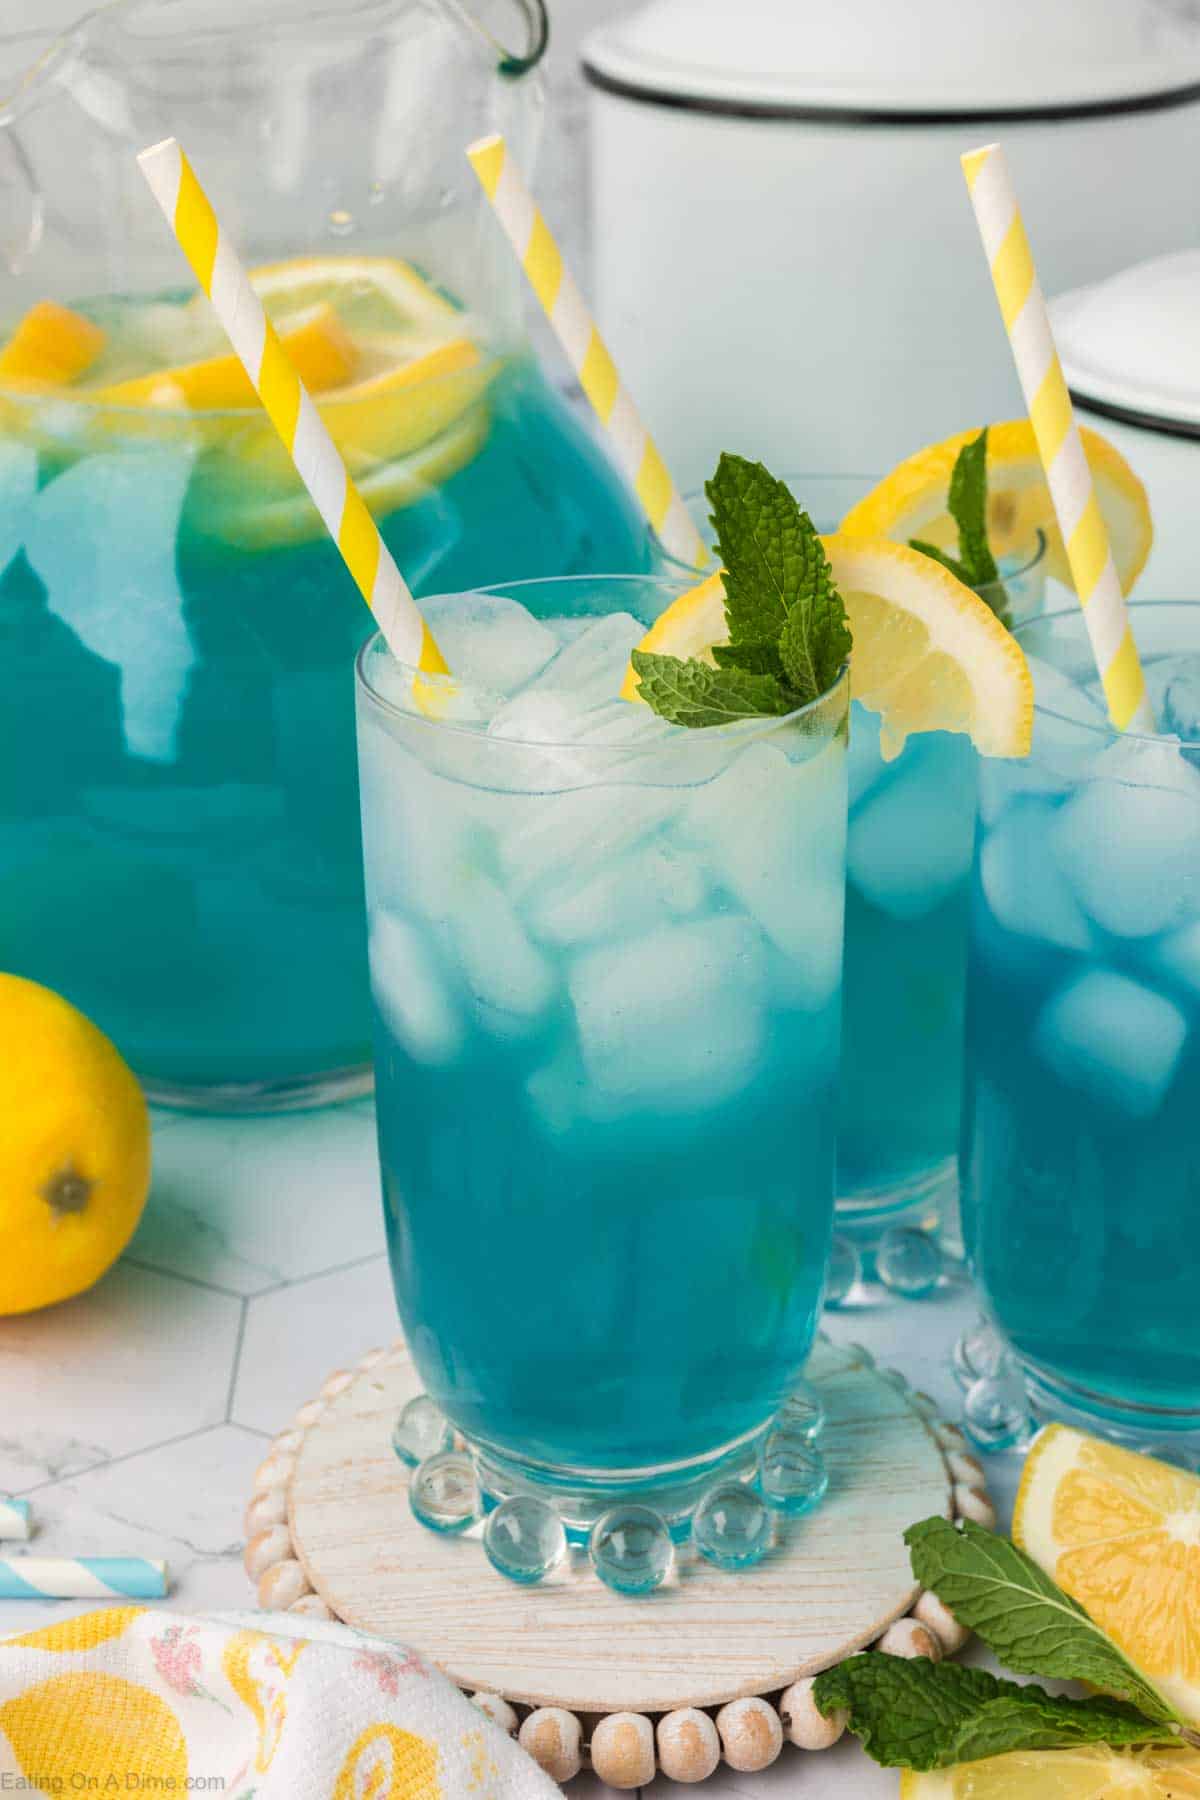 Blue lemonade in a glass topped with slice lemons and fresh mint